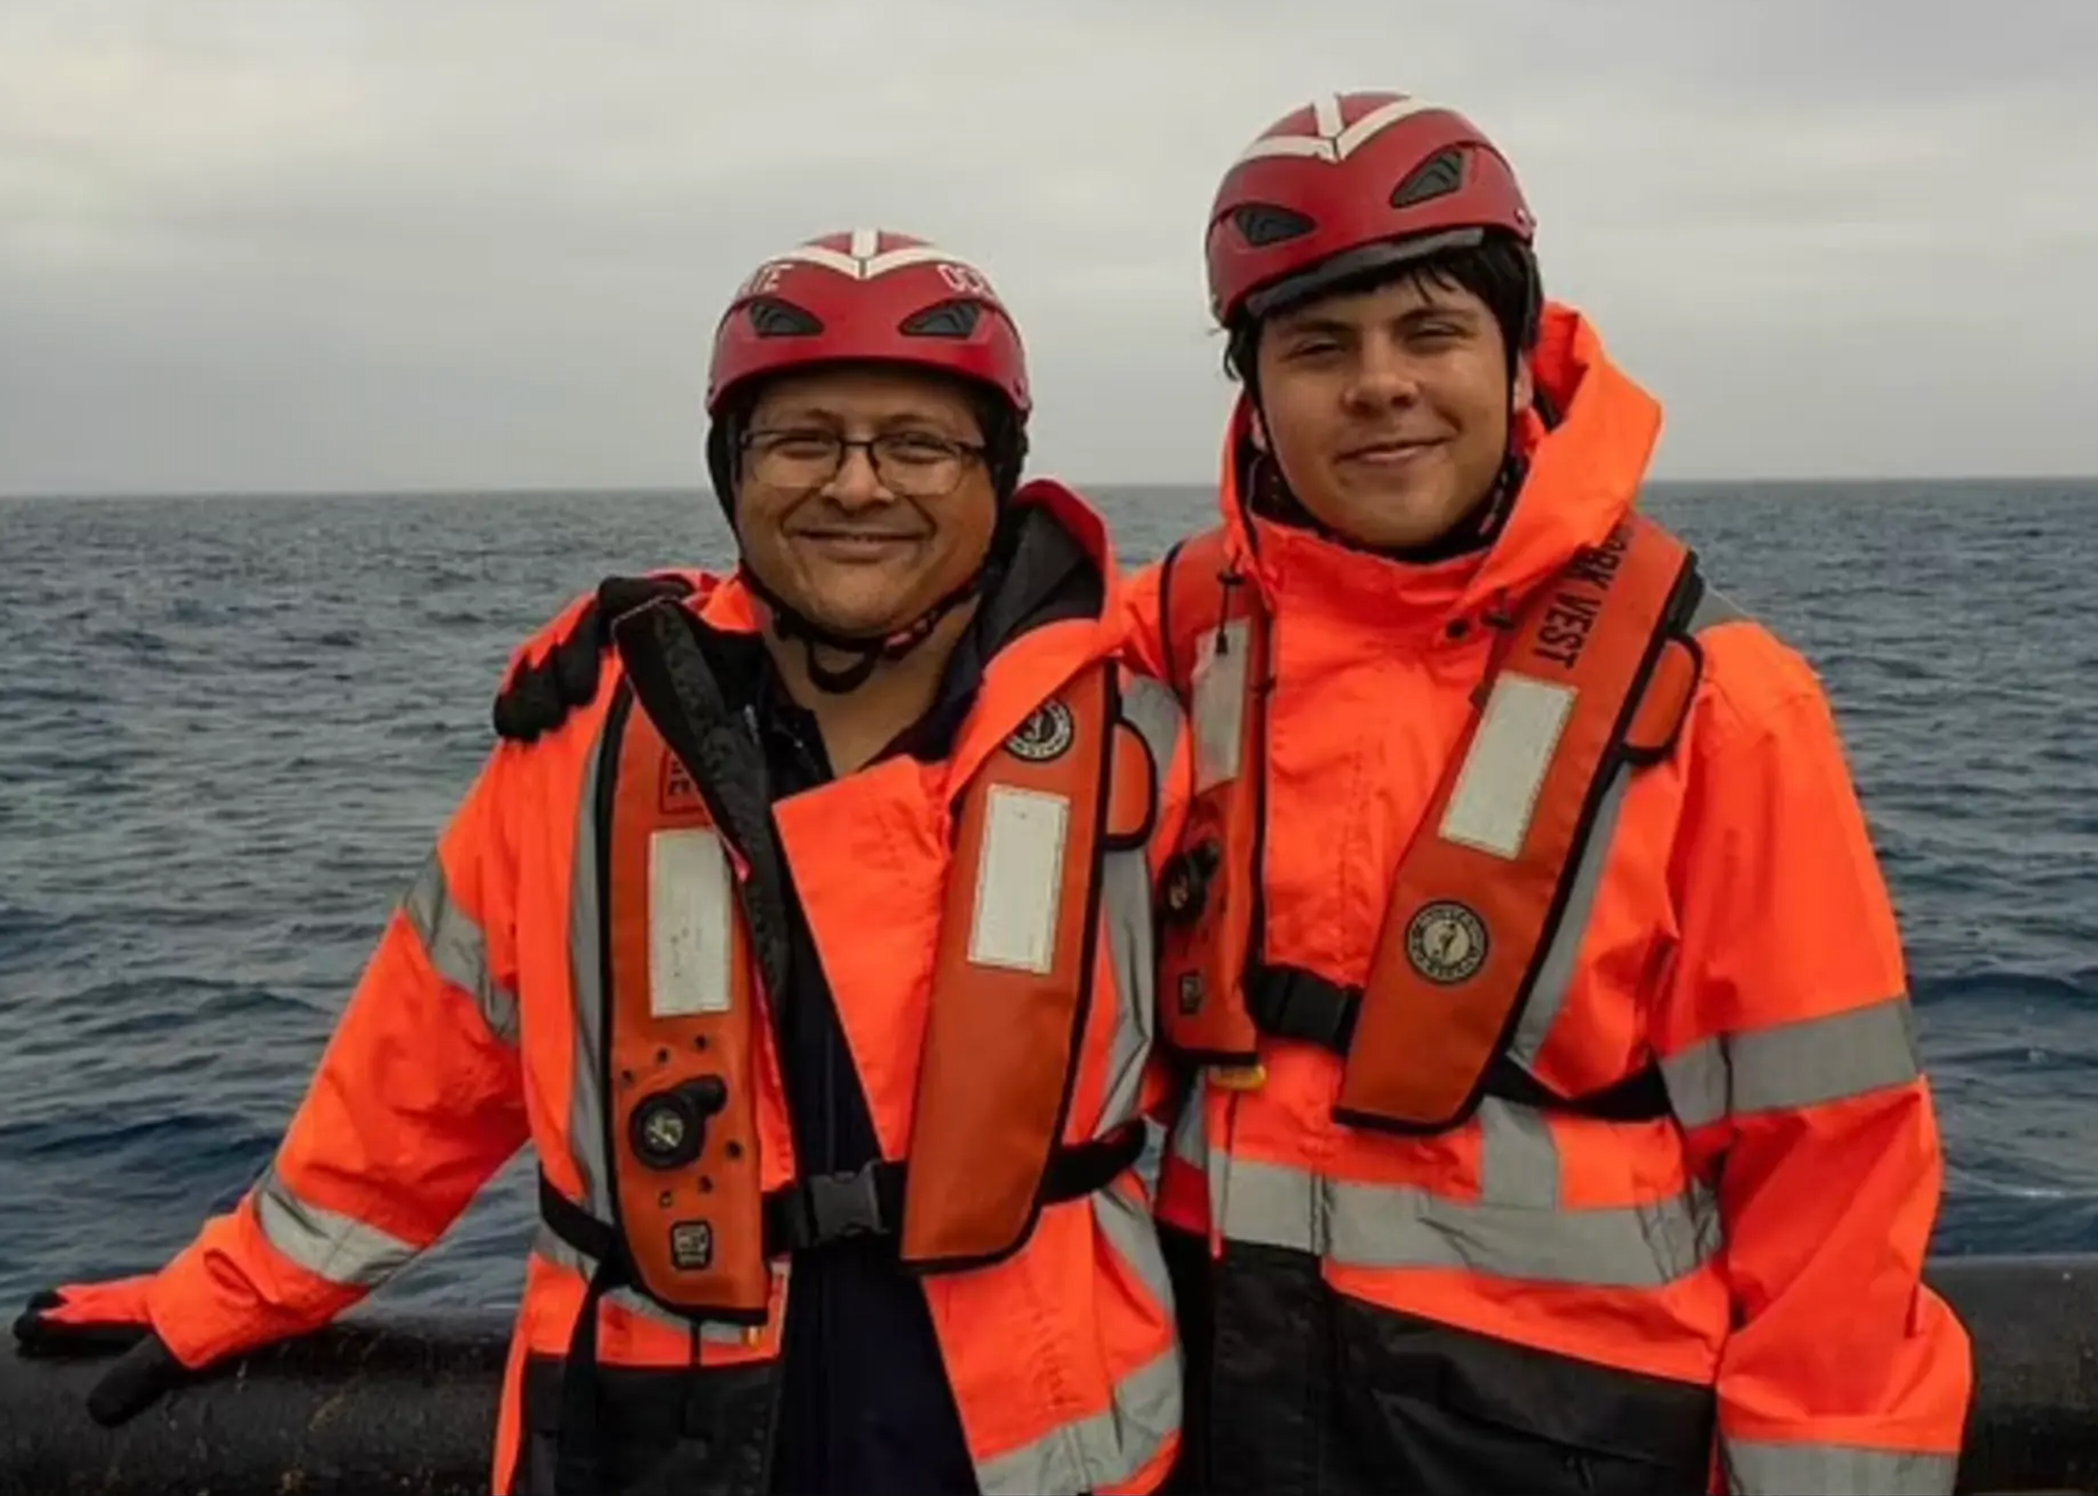 Shahzada and Suleman Dawood smile in the final photo taken before their doomed dive on board the Titan submersible